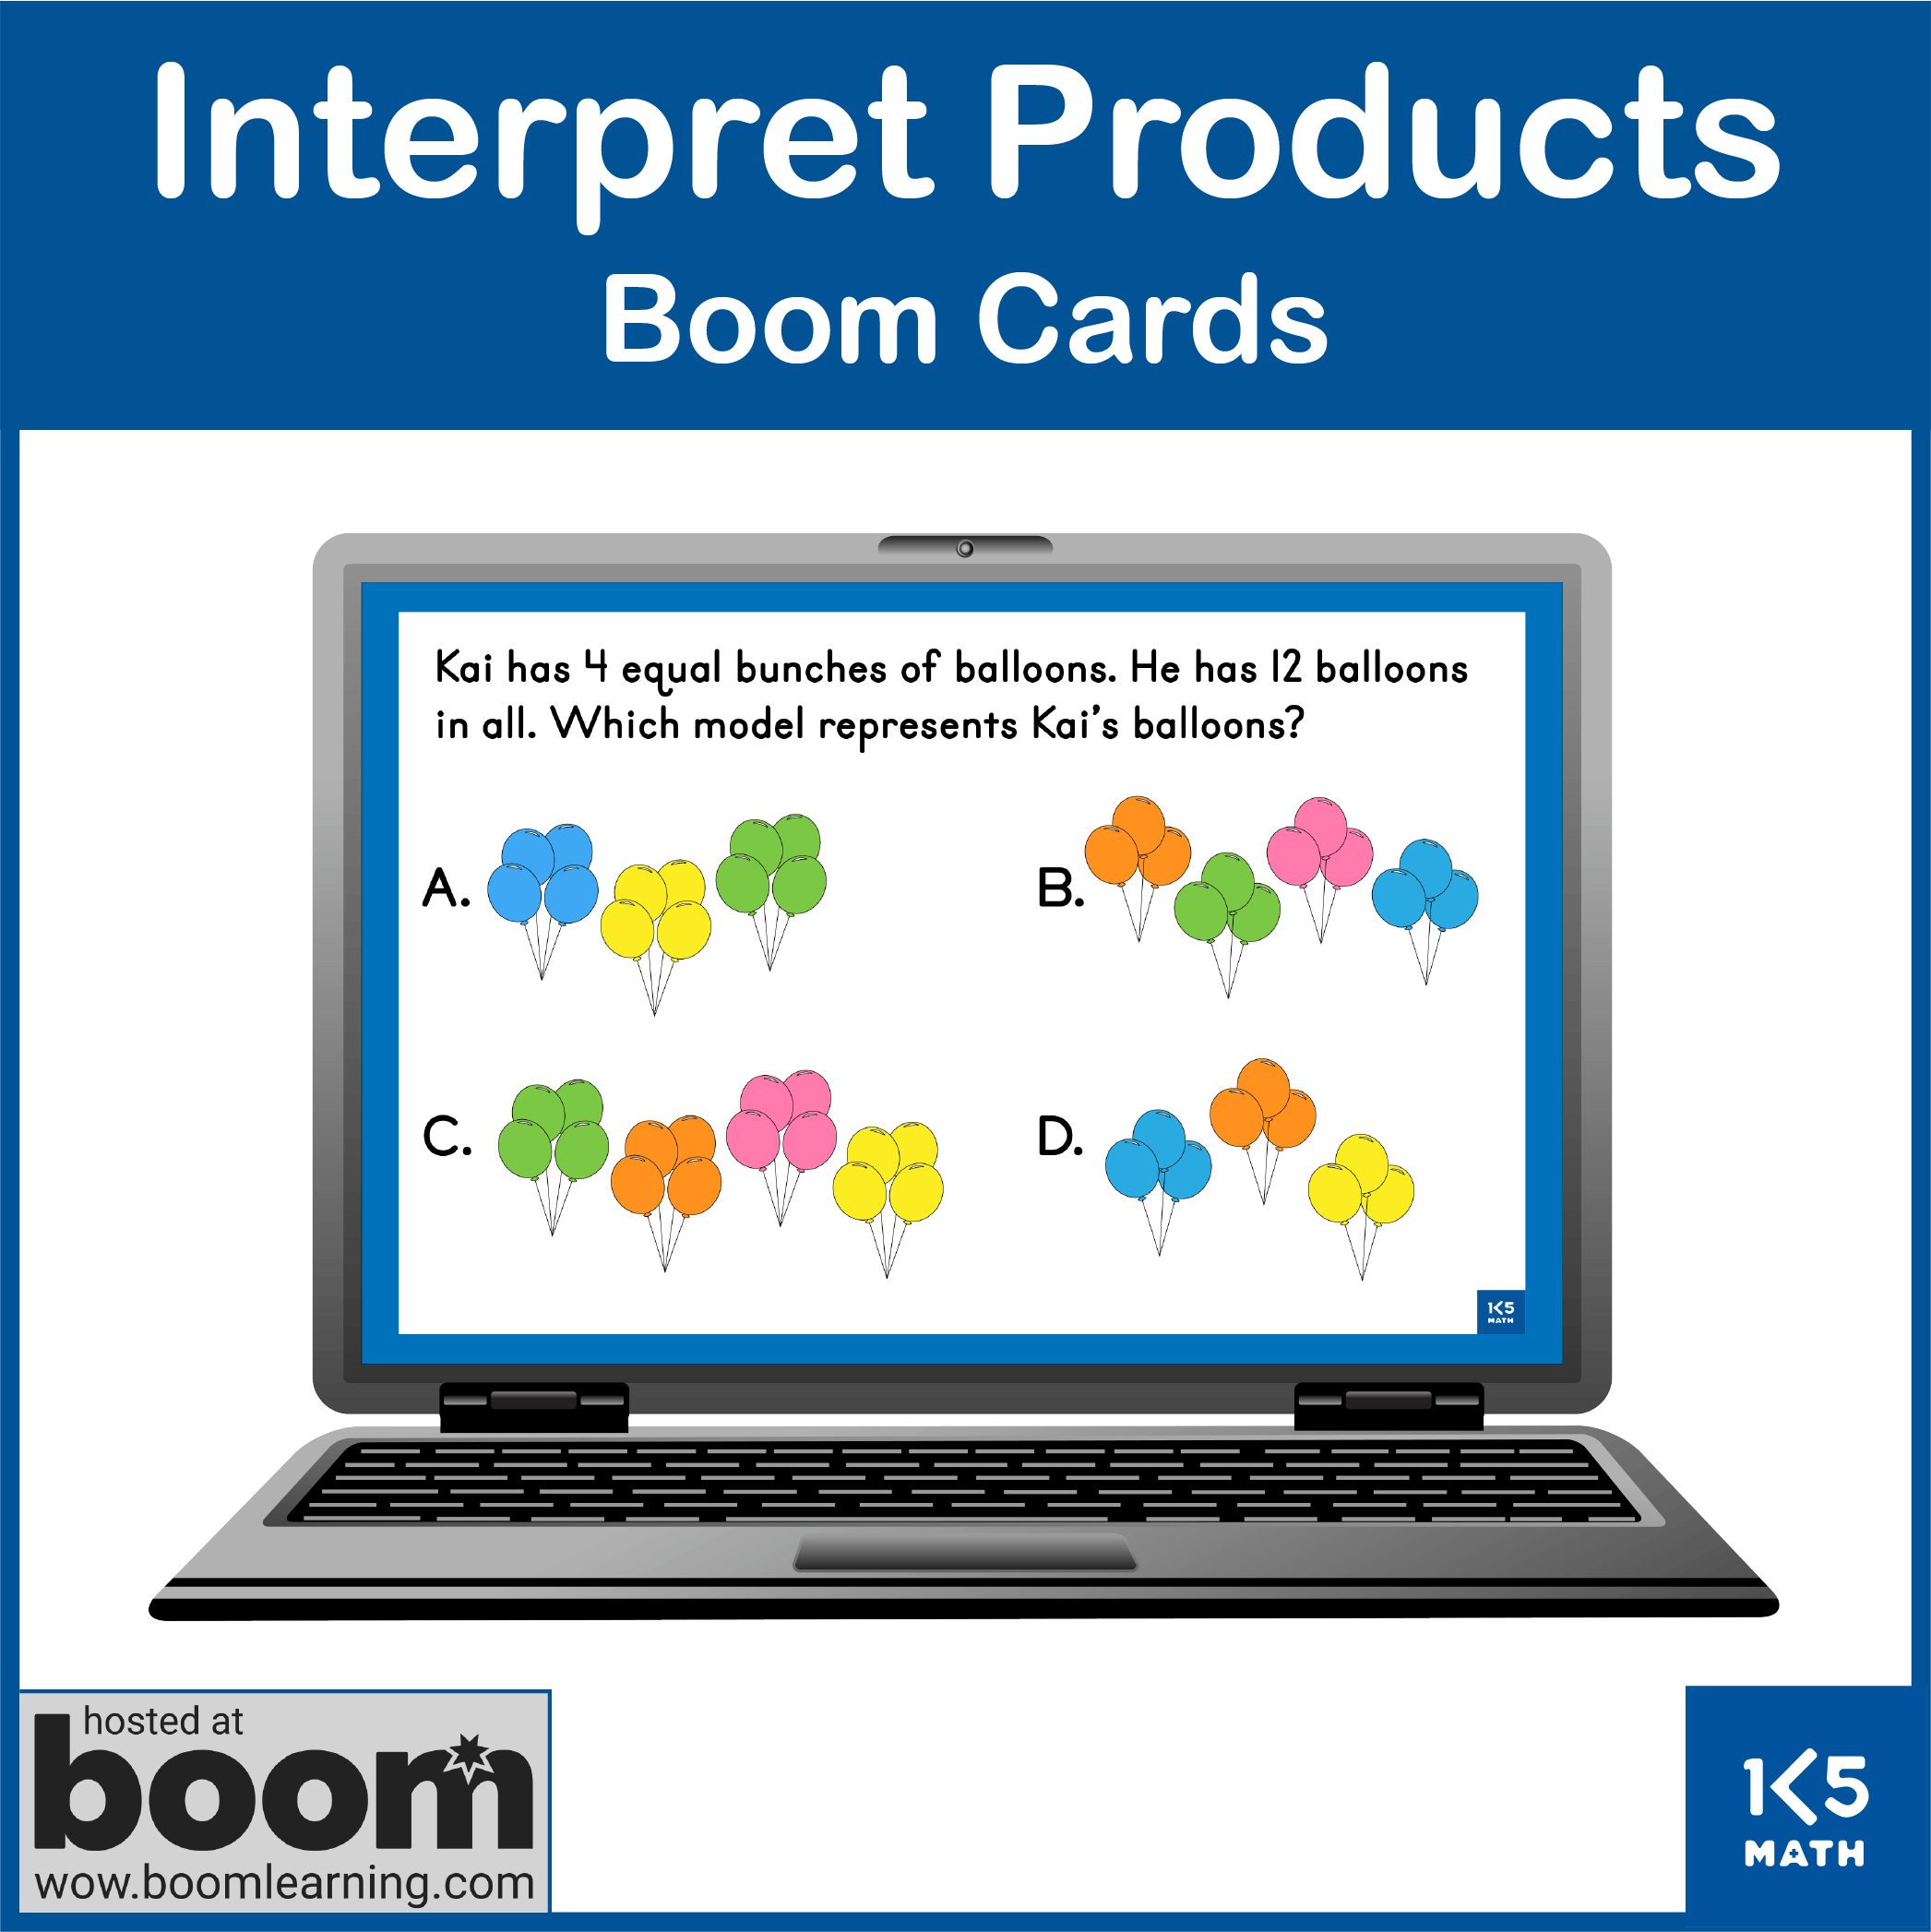 Interpret Products Boom Cards